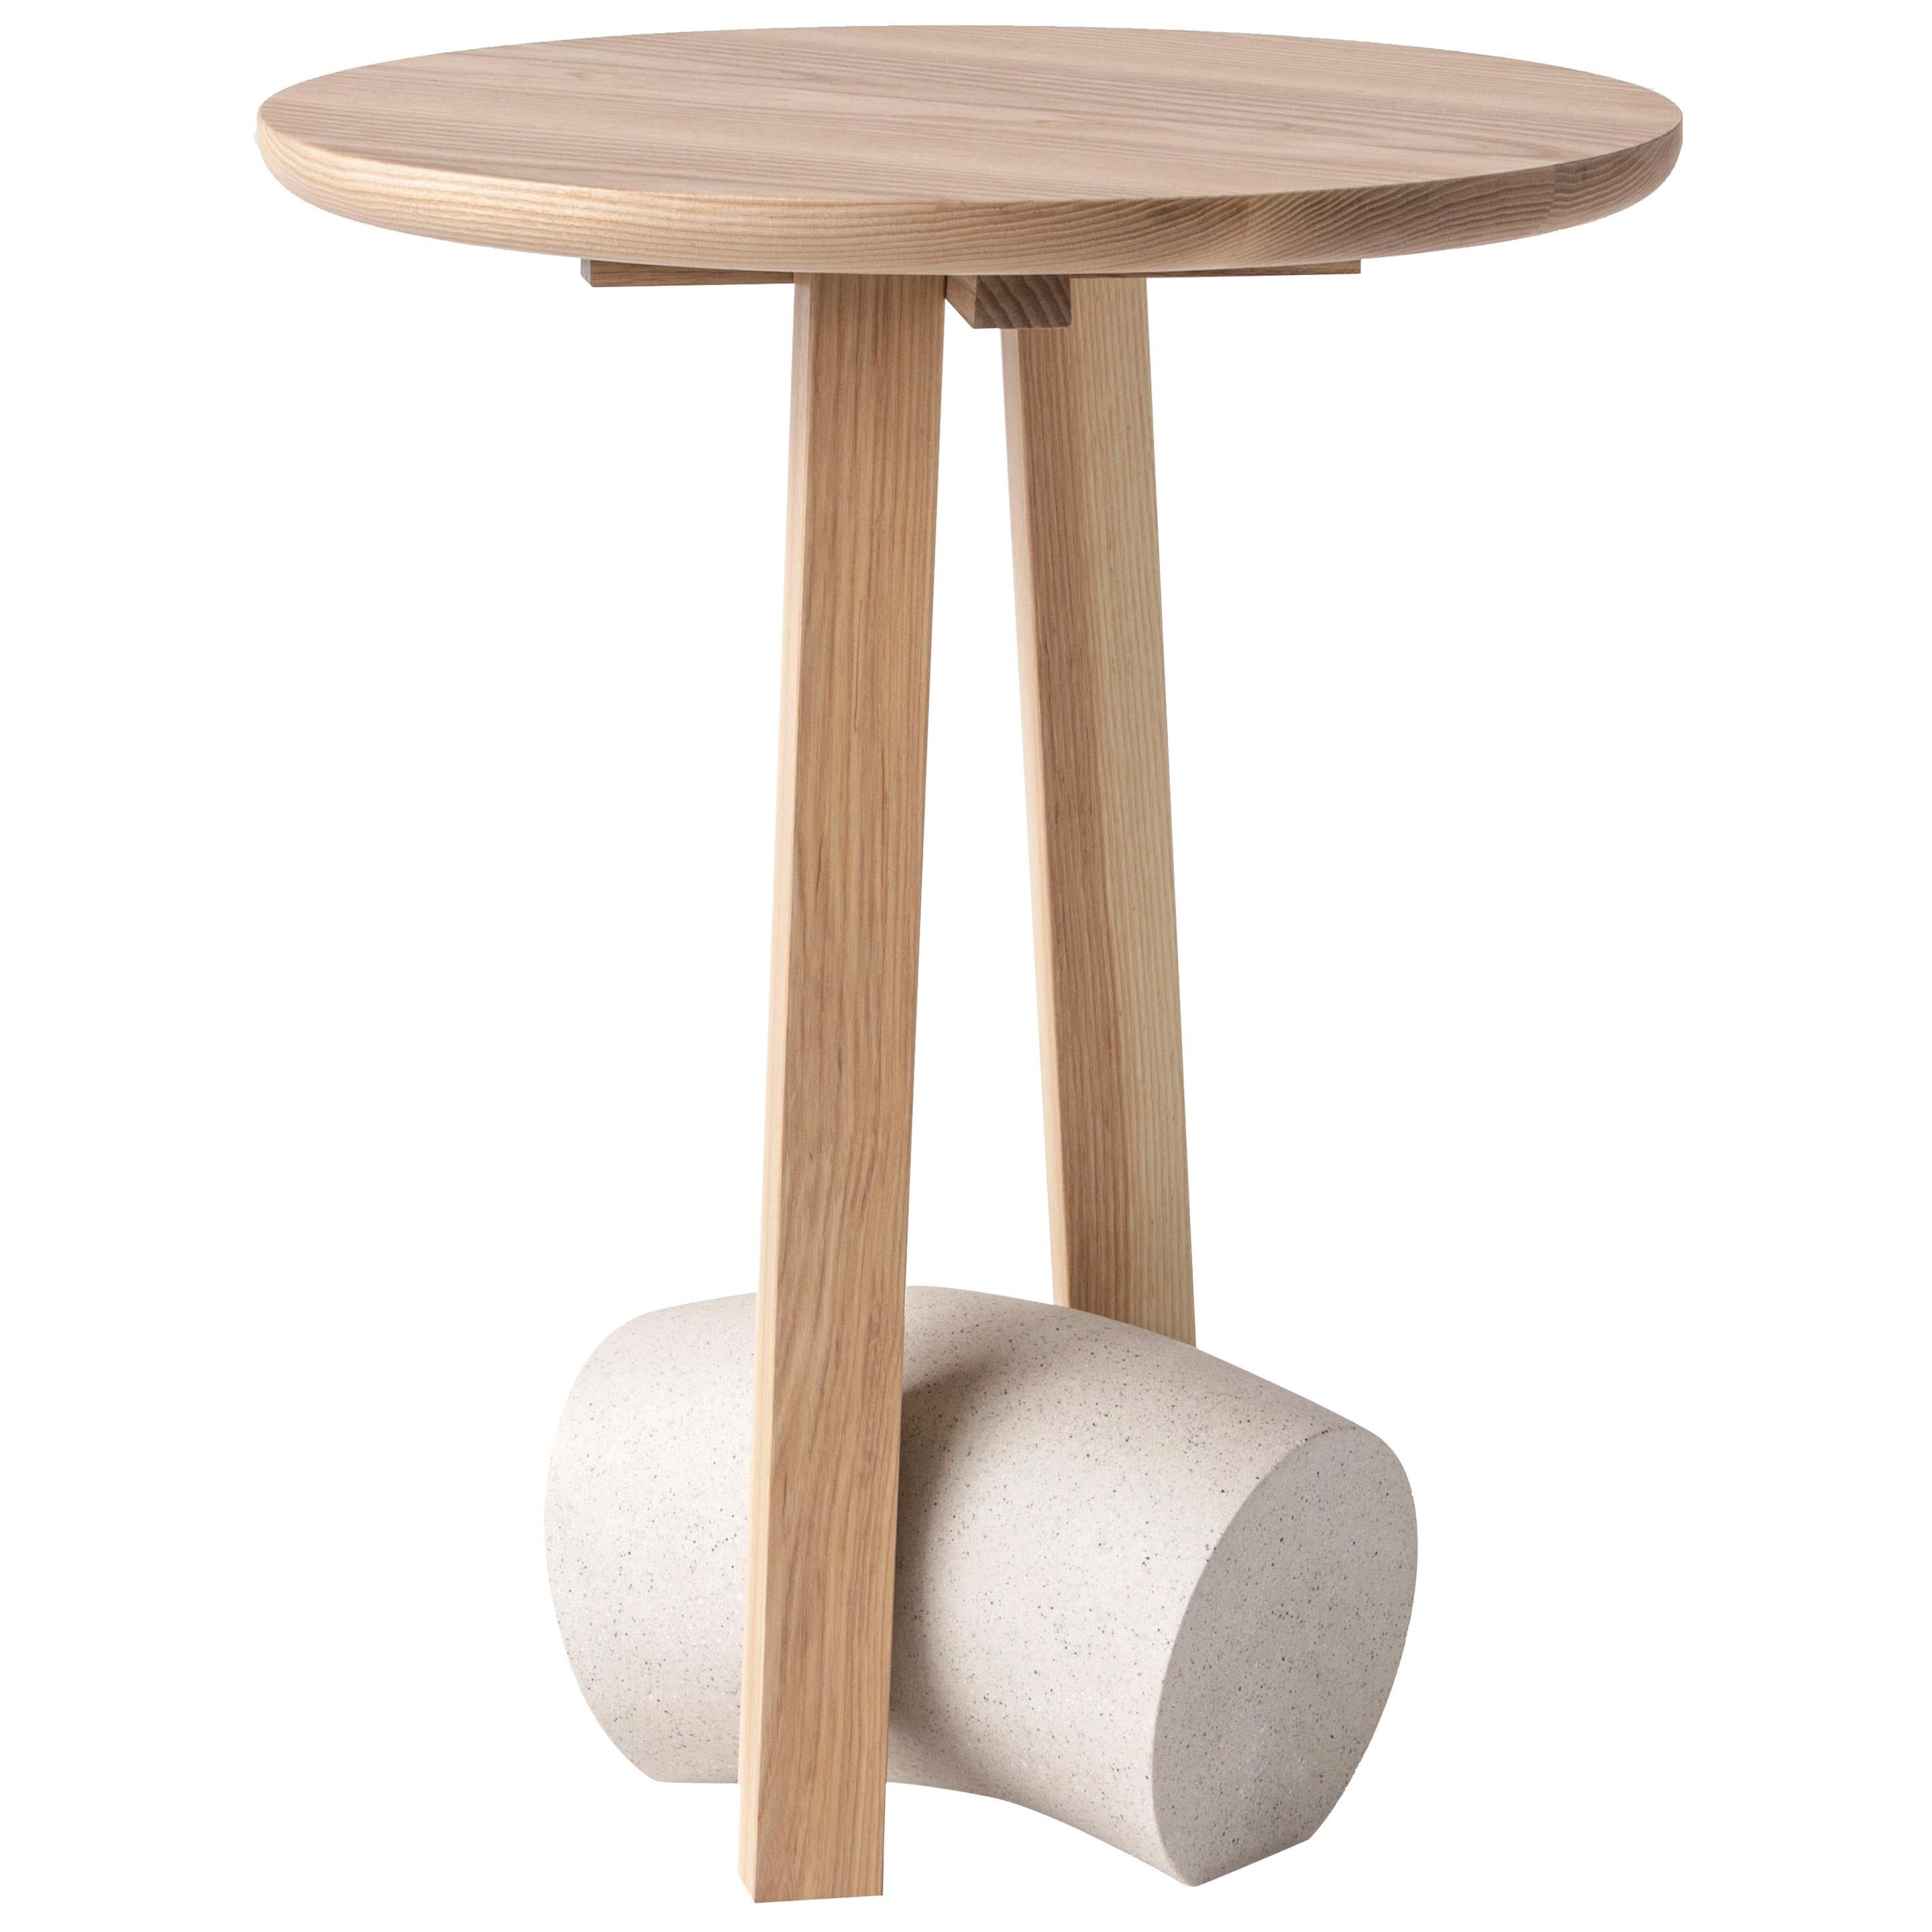 Poise Contemporary Side Table in Solid Ash Hardwood and Concrete